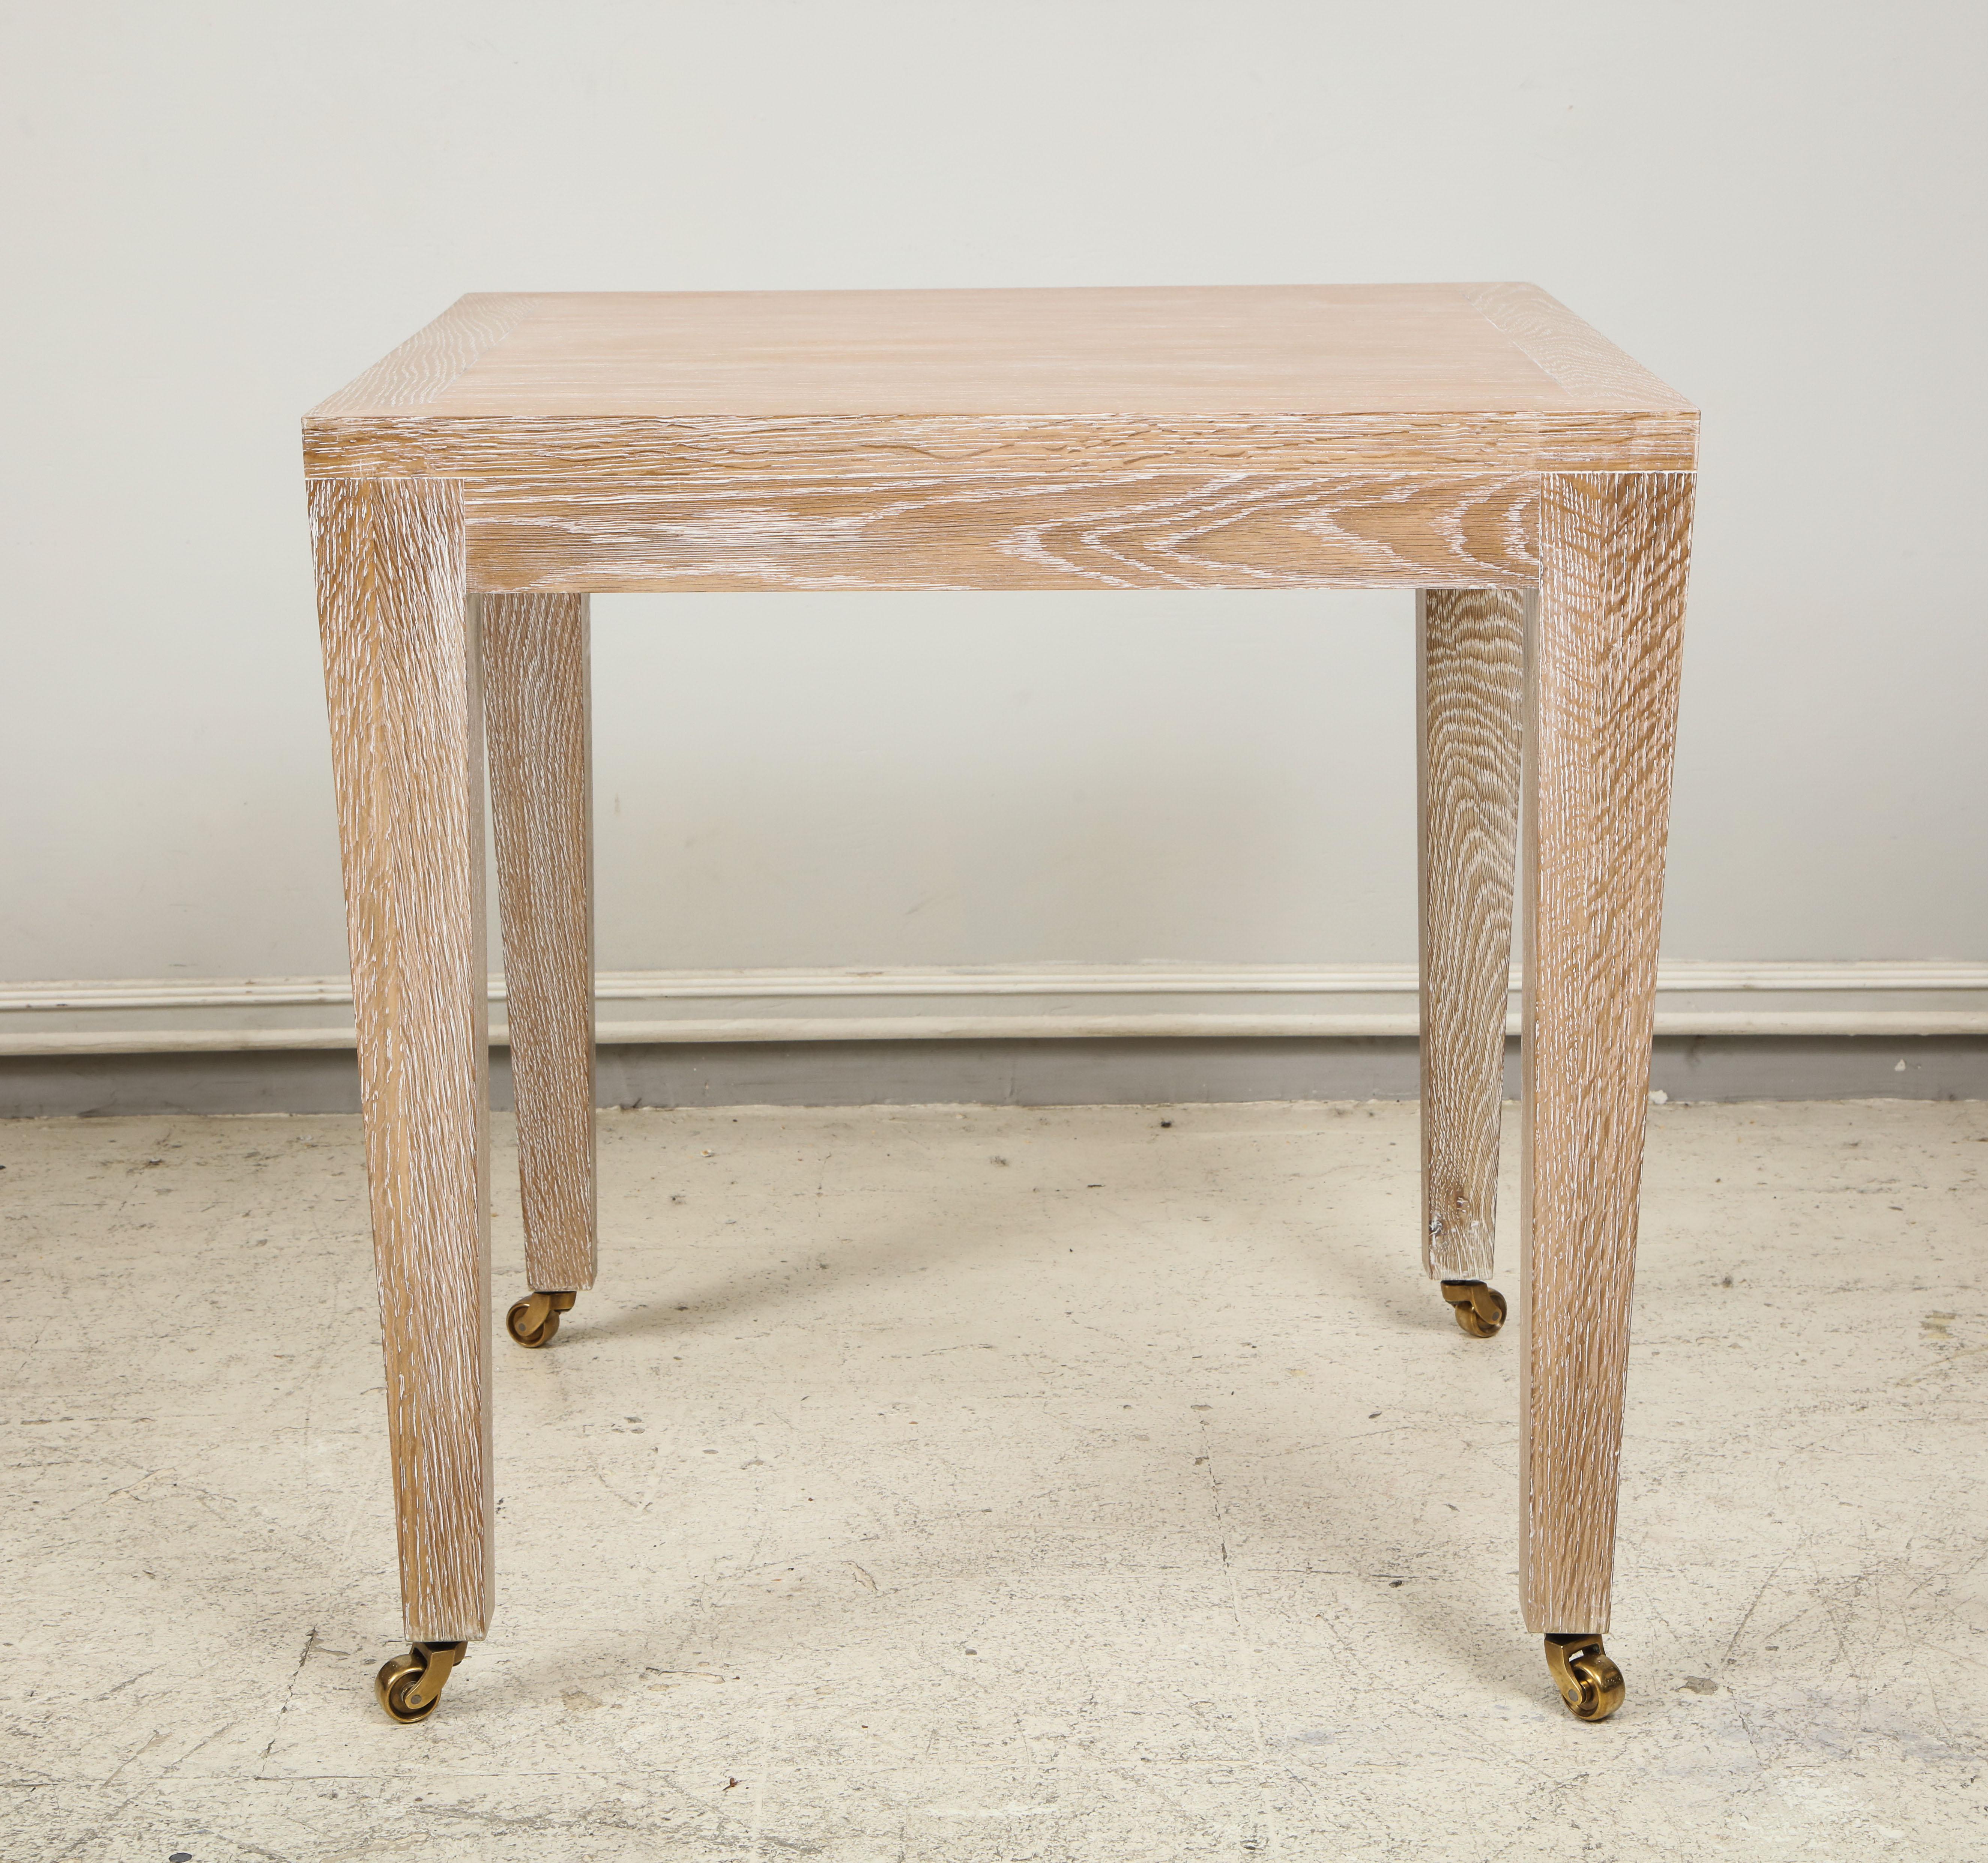 Custom cerused oak square side table on castors. This table is completely customizable and can be made in different finishes.